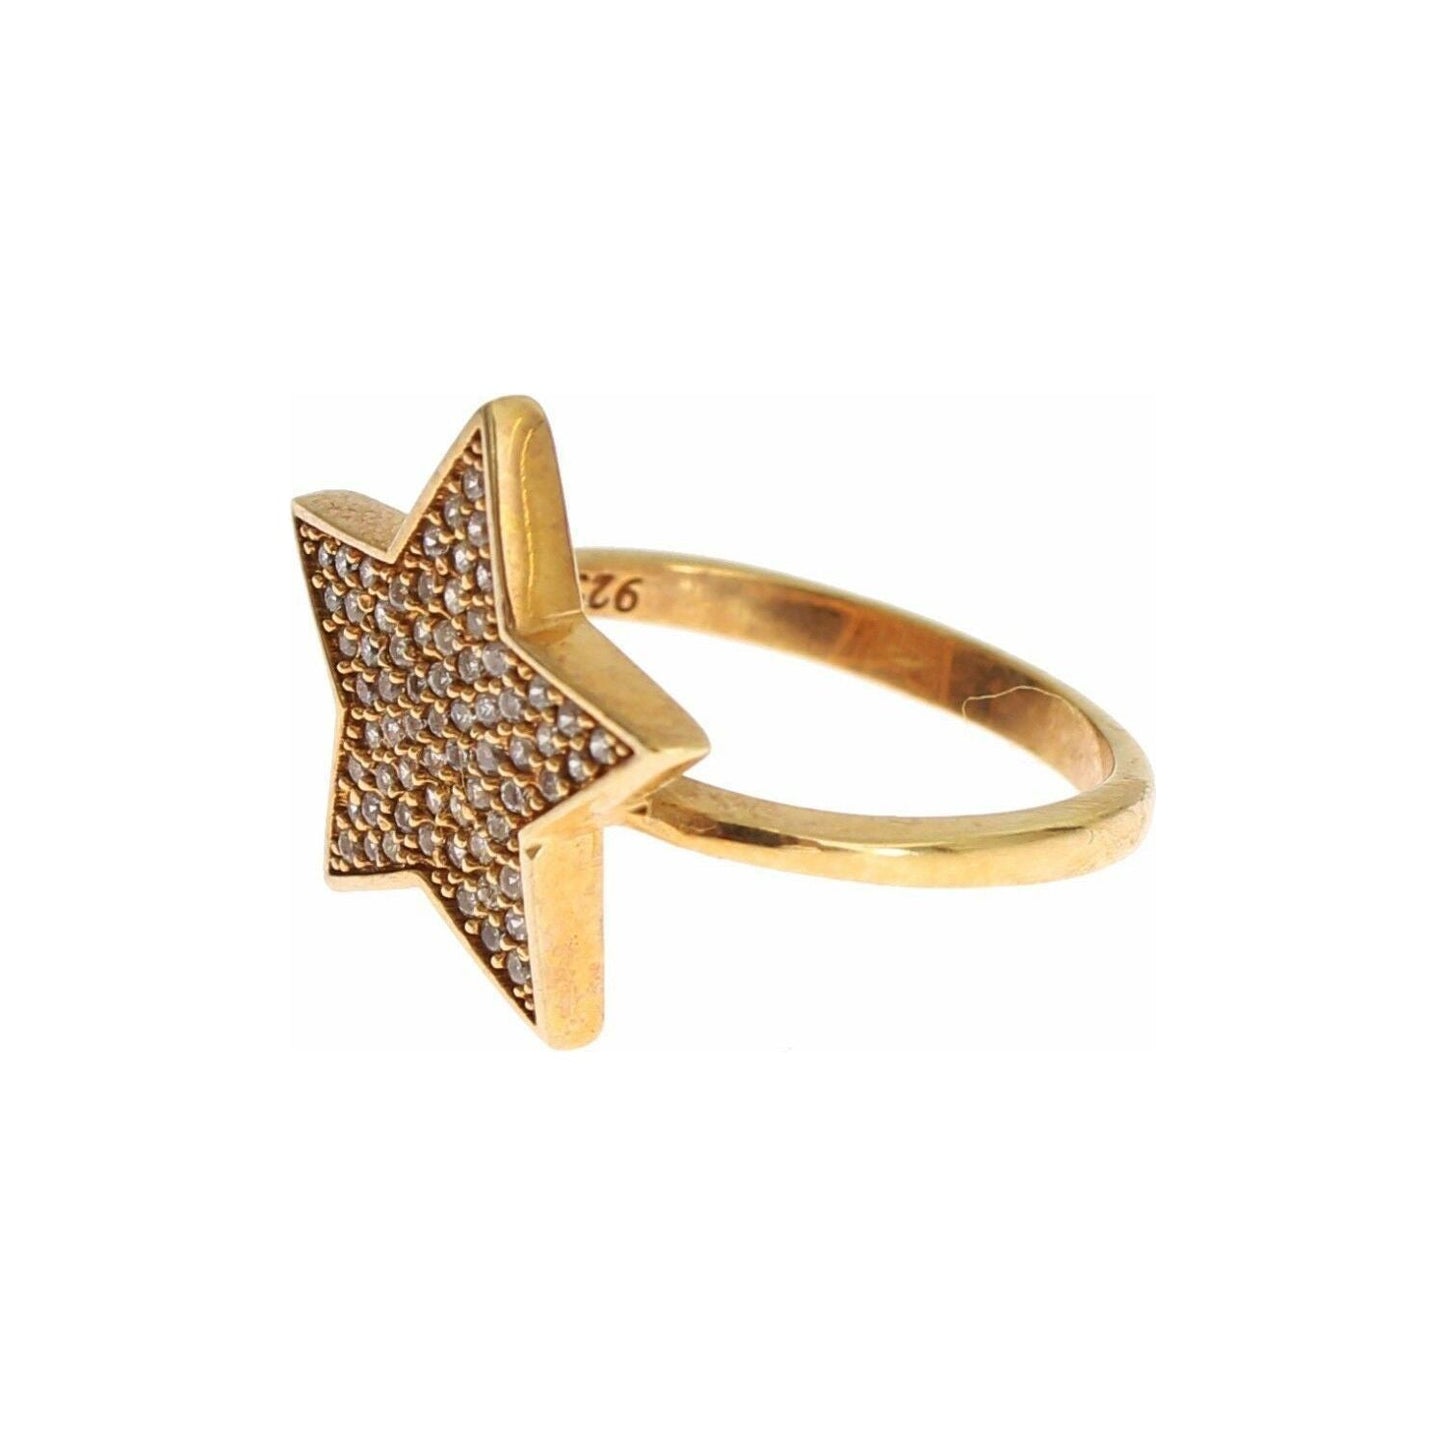 Nialaya Elegant Gold-Plated Sterling Silver Ring with CZ Crystals Ring star-gold-925-silver-womens-clear-ring s-l1600-66-2-8551d9a6-41c.jpg